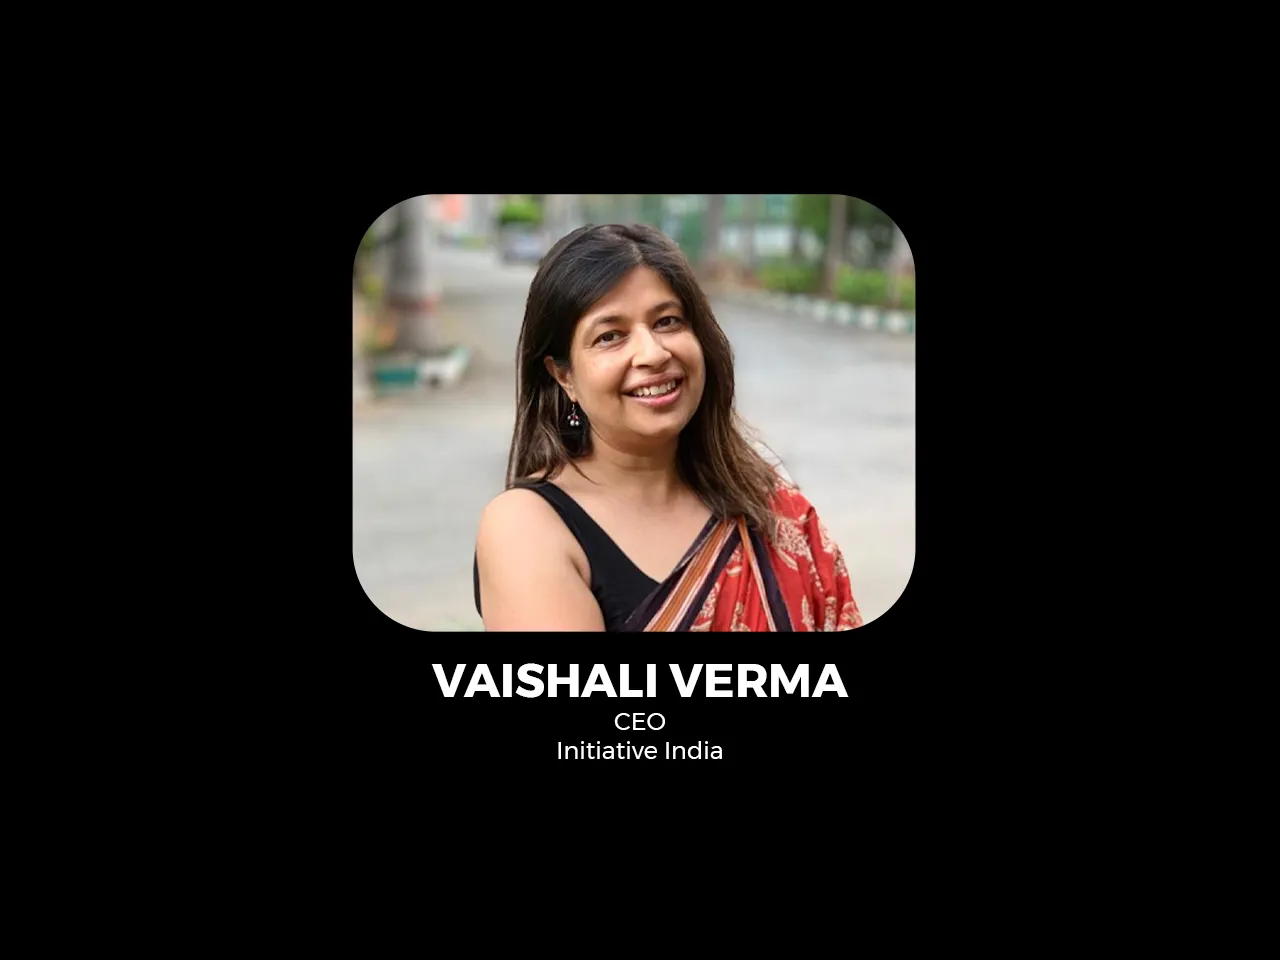 World Cup will be a big needle mover for brands who want to make it big: Vaishali Verma, Initiative India